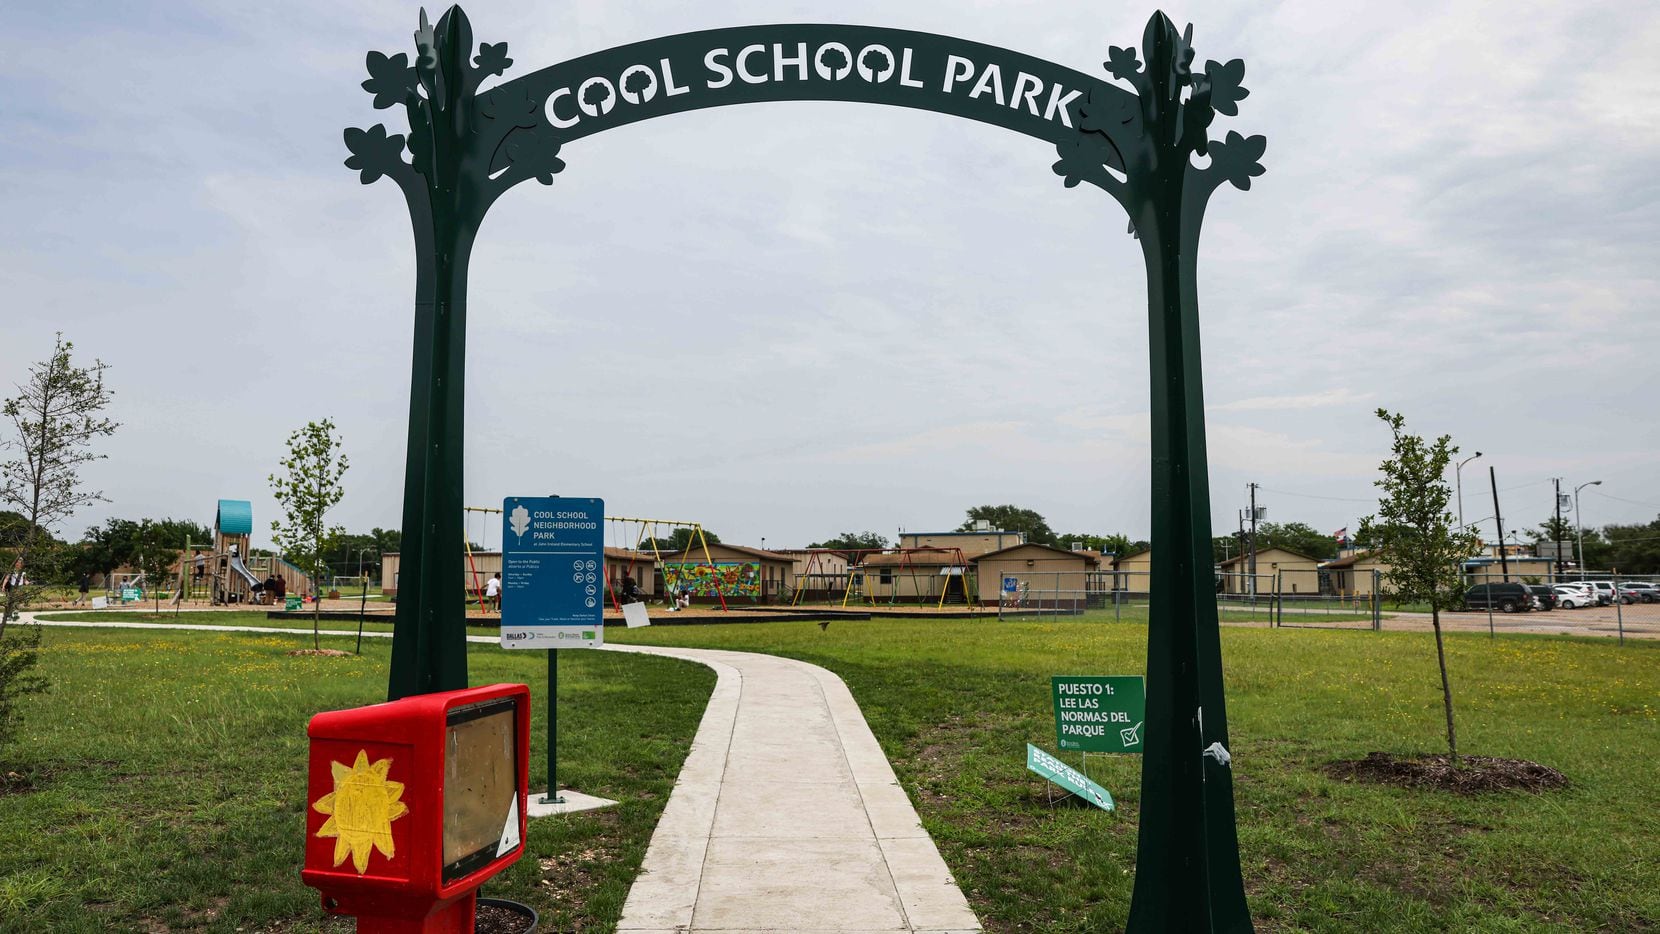 The new "Cool School Park" entrance at John Ireland Elementary in southeast Dallas welcomes neighbors to the campus greenspace. The public is able to access the new and expanded park during the hours and days that school is not in session.